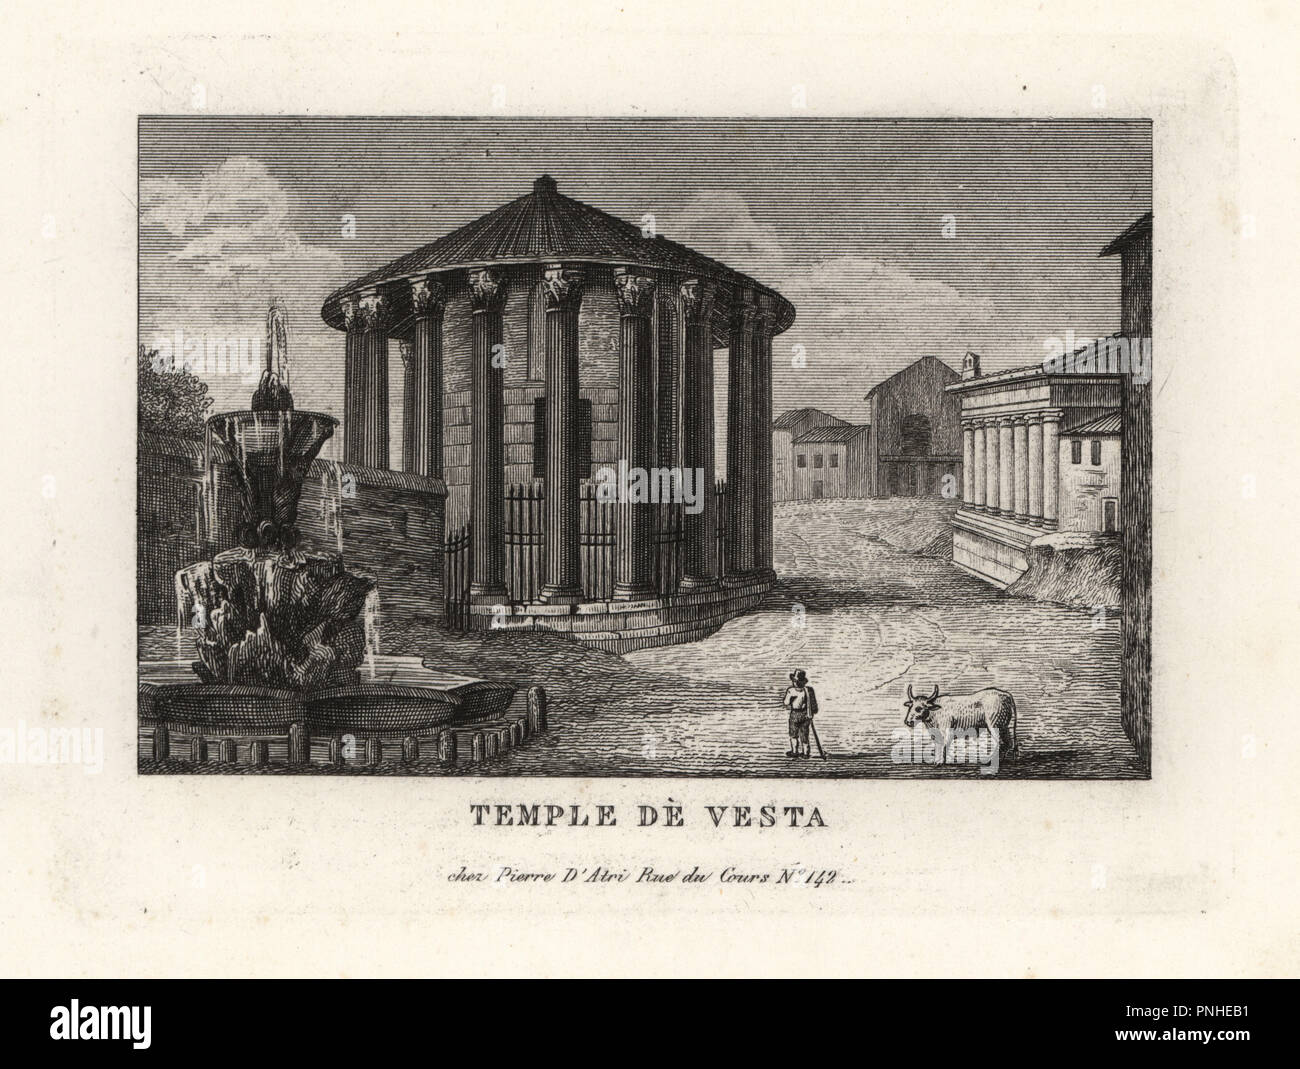 View of the Temple of Vesta, Rome, 1849. Copperplate engraving from Pietro Datri's New Collection of Principal Views of Rome Ancient and Modern with the ruins of war, Rome, 1849. Stock Photo